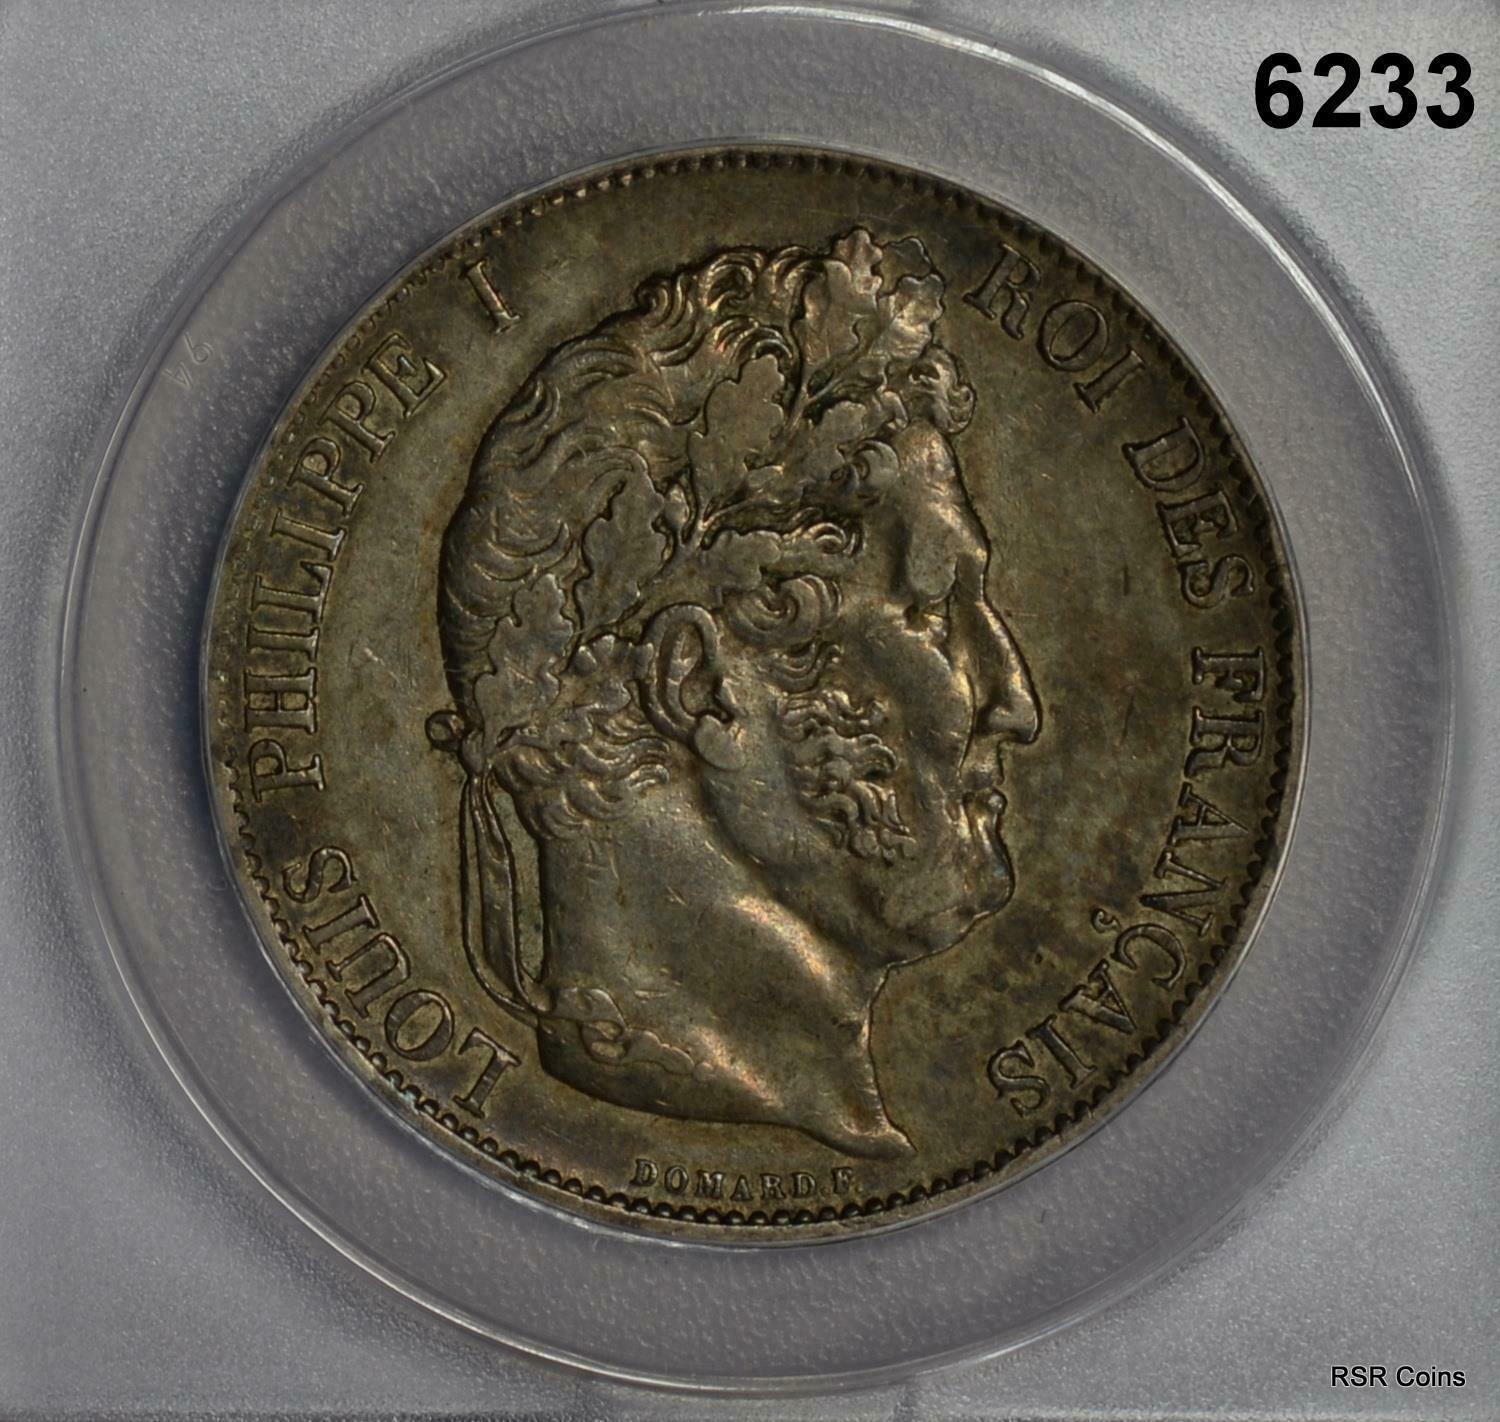 1874 A 5 FRANC FRANCE LOUIS PHILIPPE ANACS CERTIFIED EF45 #6233